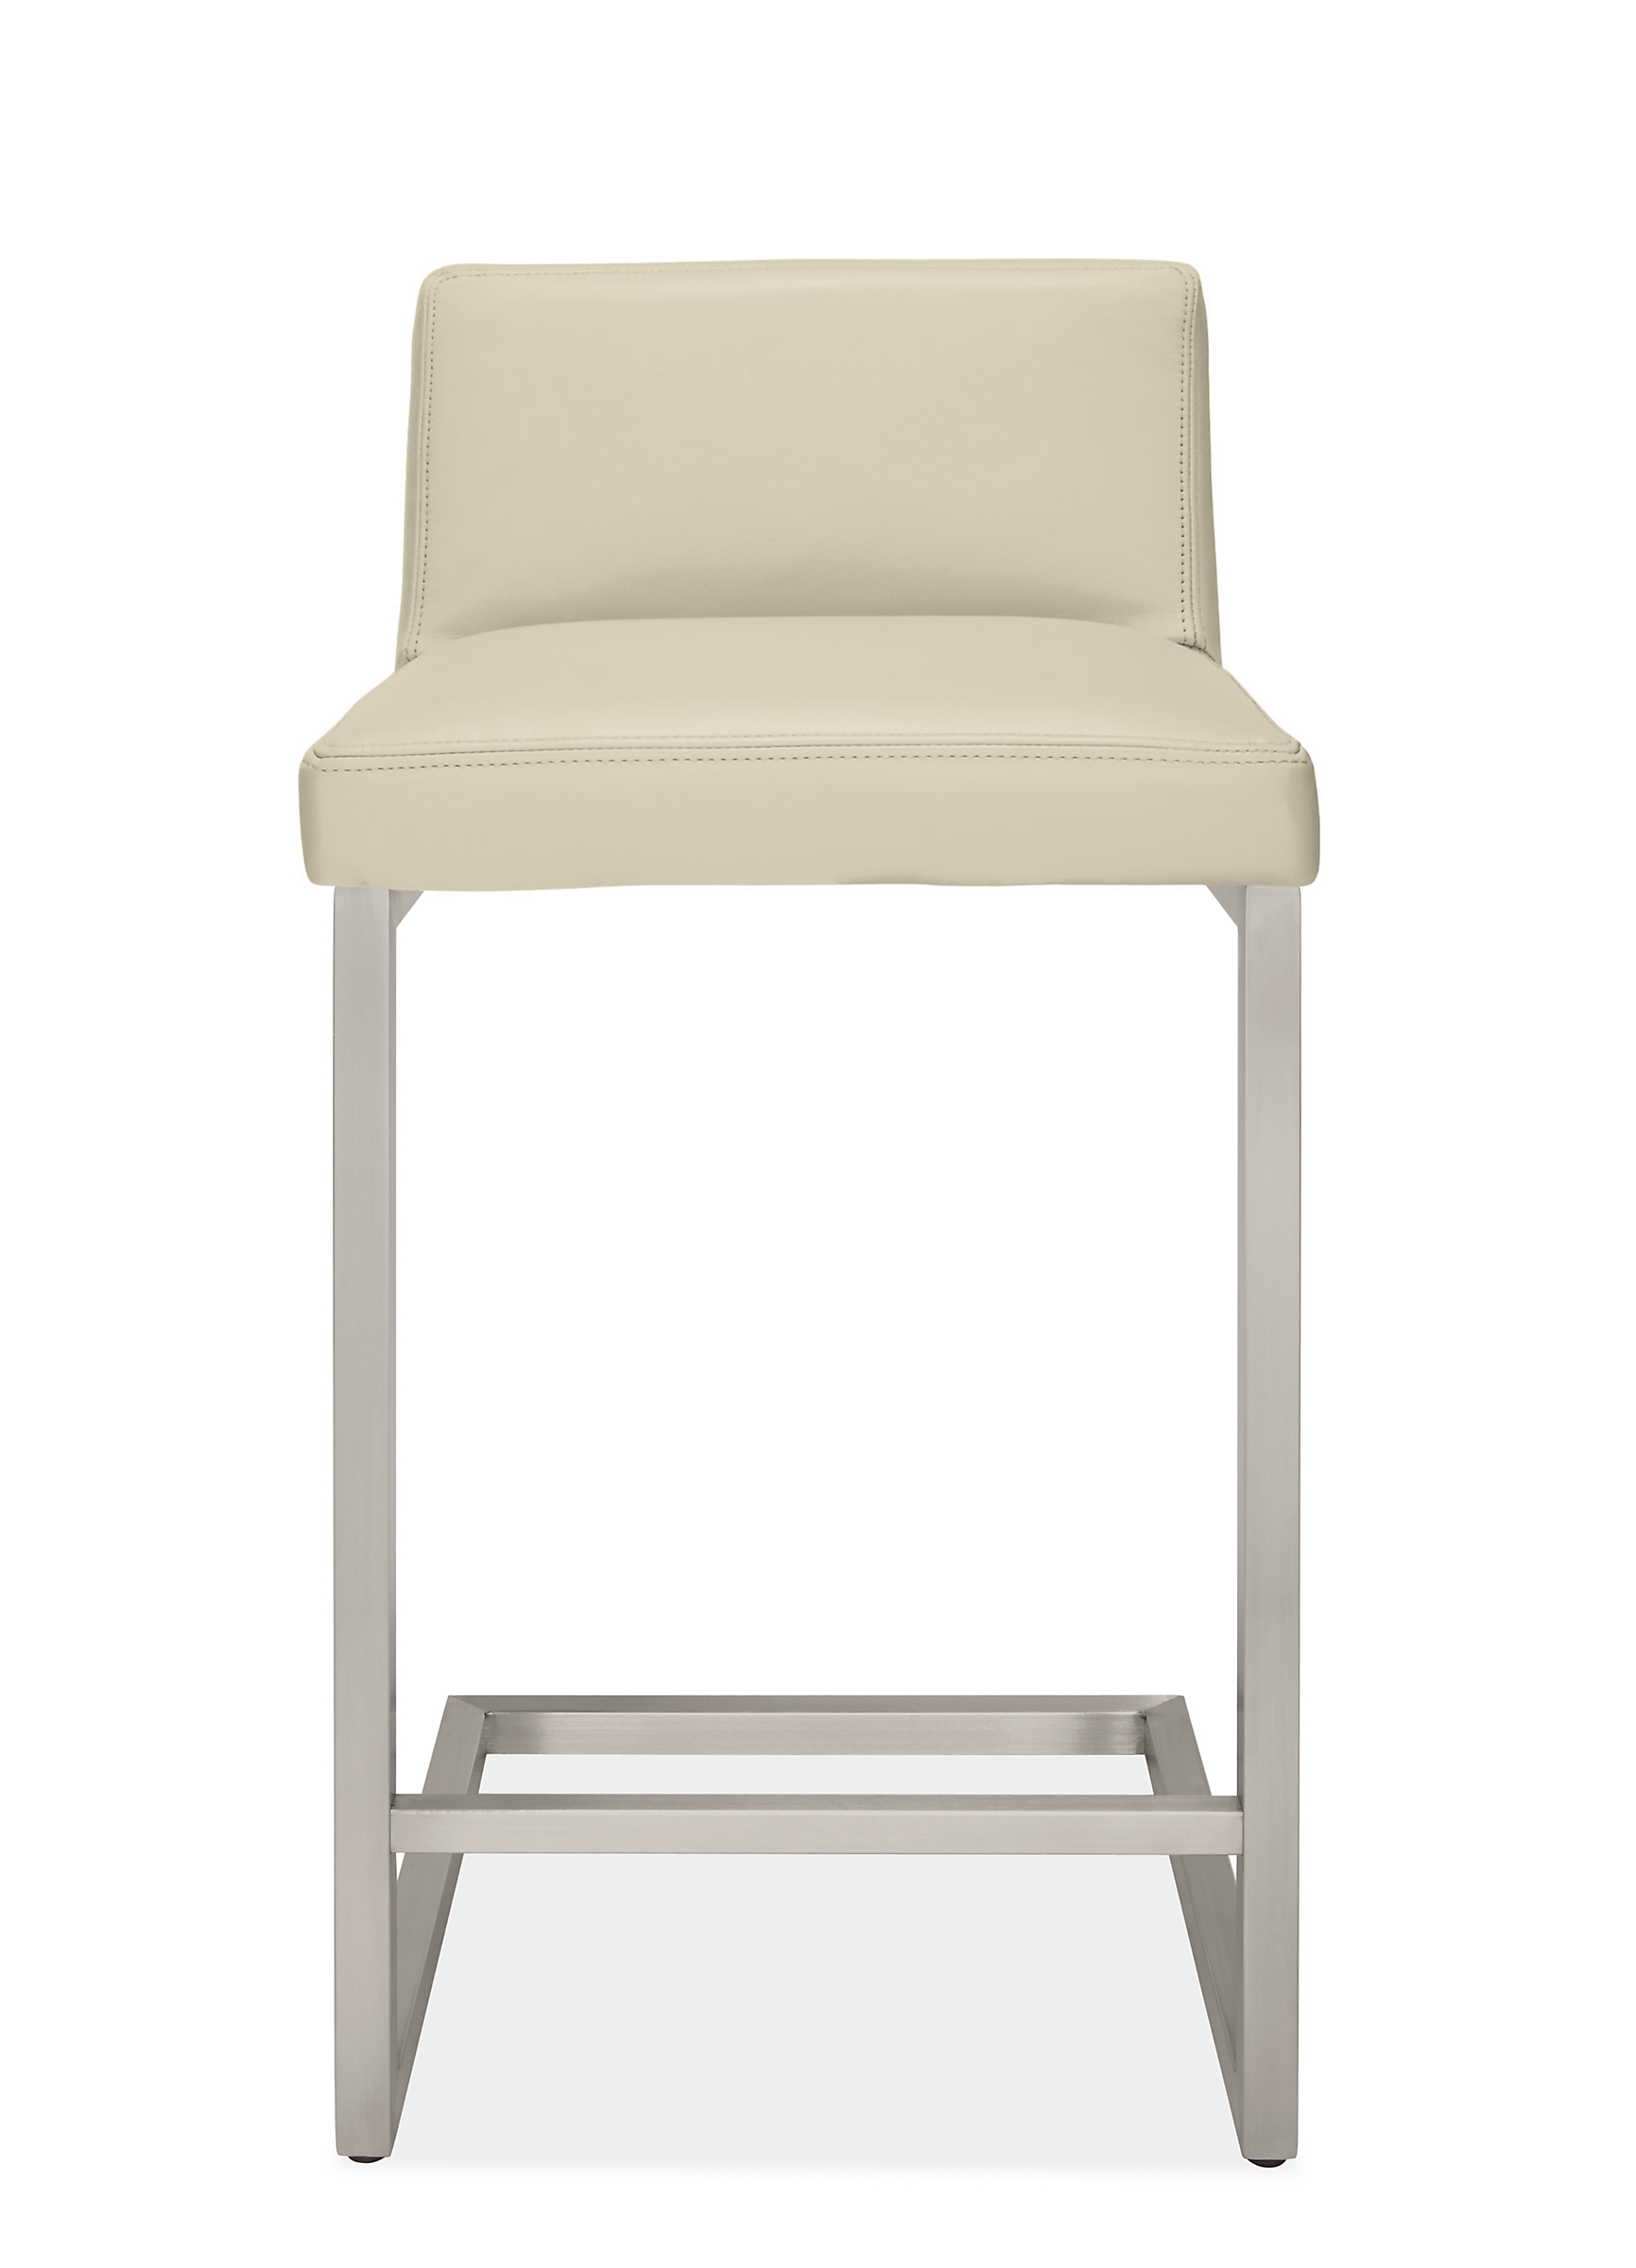 Front view of Lira Counter Stool in Urbino Leather.